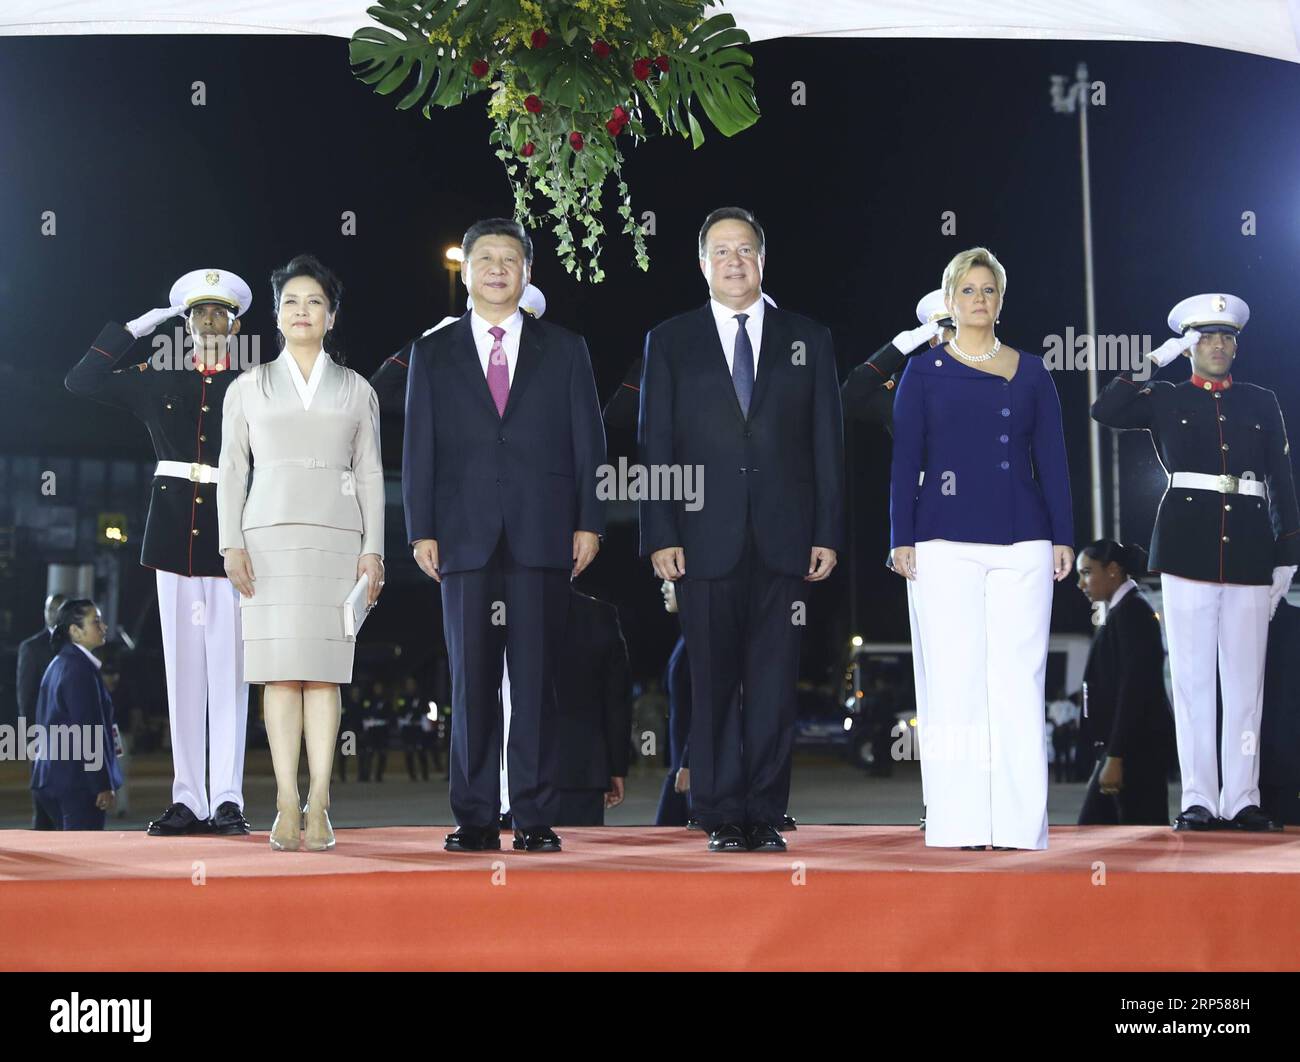 (181202) -- PANAMA CITY, Dec. 2, 2018 -- Chinese President Xi Jinping (2nd L Front), his wife Peng Liyuan (1st L Front), Panamanian President Juan Carlos Varela (2nd R Front) and his wife Lorena Castillo Garcia (1st R Front) attend a grand welcoming ceremony Juan Carlos Varela held for Xi Jinping in Panama City Dec. 2, 2018. President Xi Jinping arrived here on Sunday for a state visit to Panama. ) (yxb) PANAMA-PANAMA CITY-CHINESE PRESIDENT-ARRIVAL XiexHuanchi PUBLICATIONxNOTxINxCHN Stock Photo